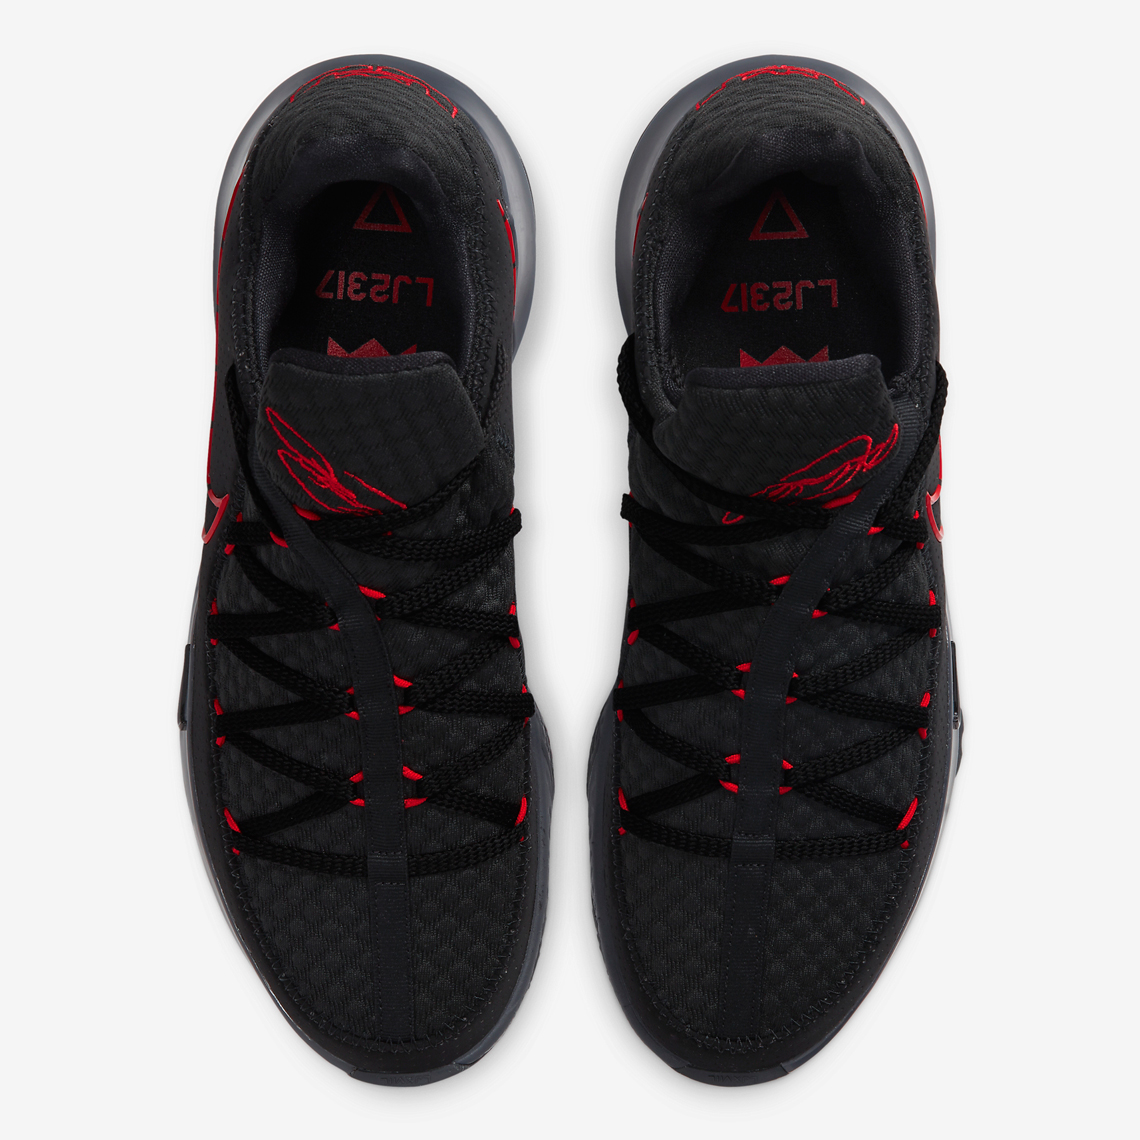 Nike LeBron 17 Low Bred CD5007-001 Release Date | SneakerNews.com